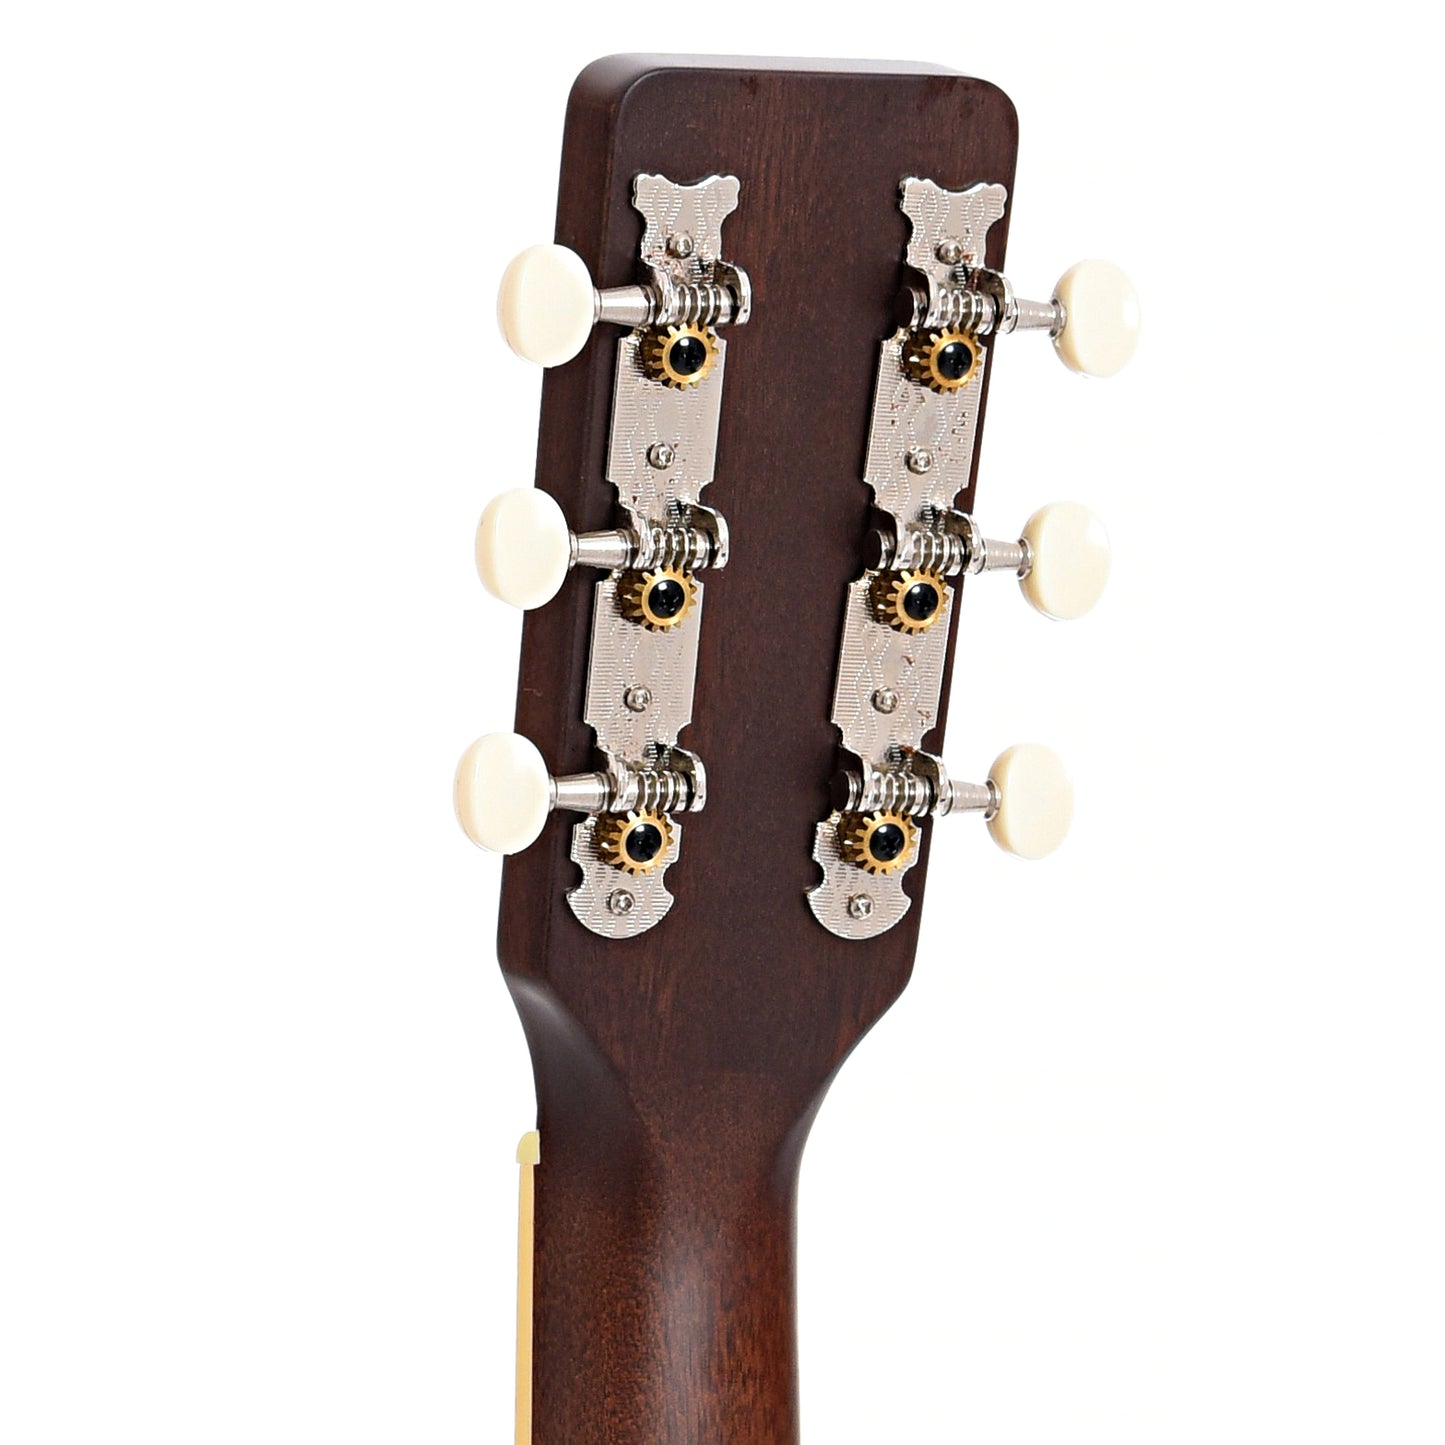 Back headstock of Gretsch Jim Dandy Parlor Acoustic Guitar, Frontier Stain